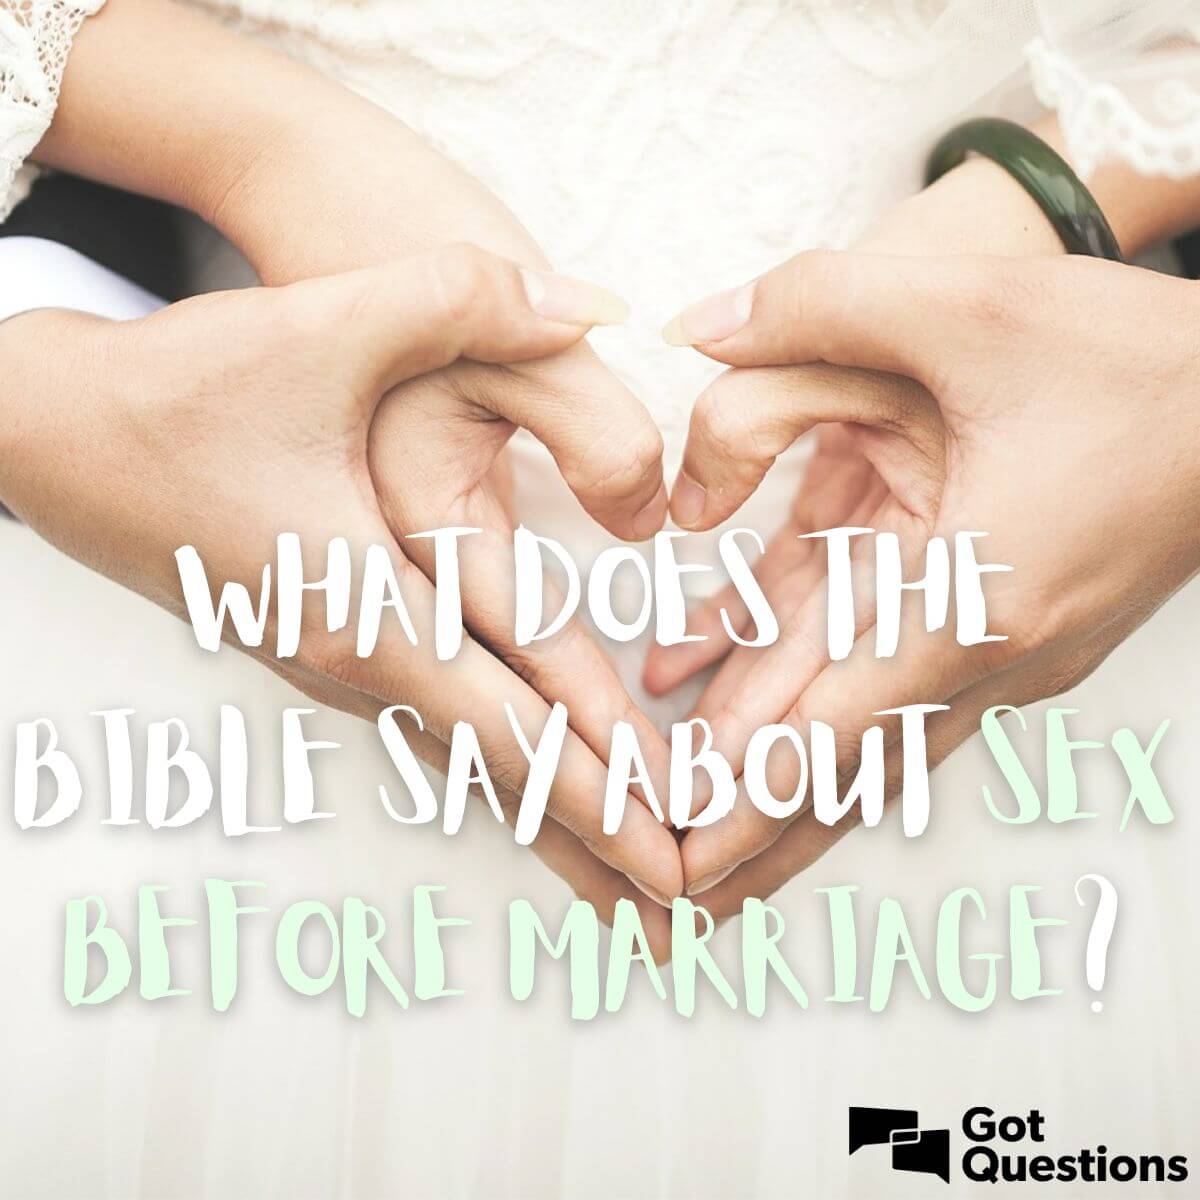 does god condone non married sex